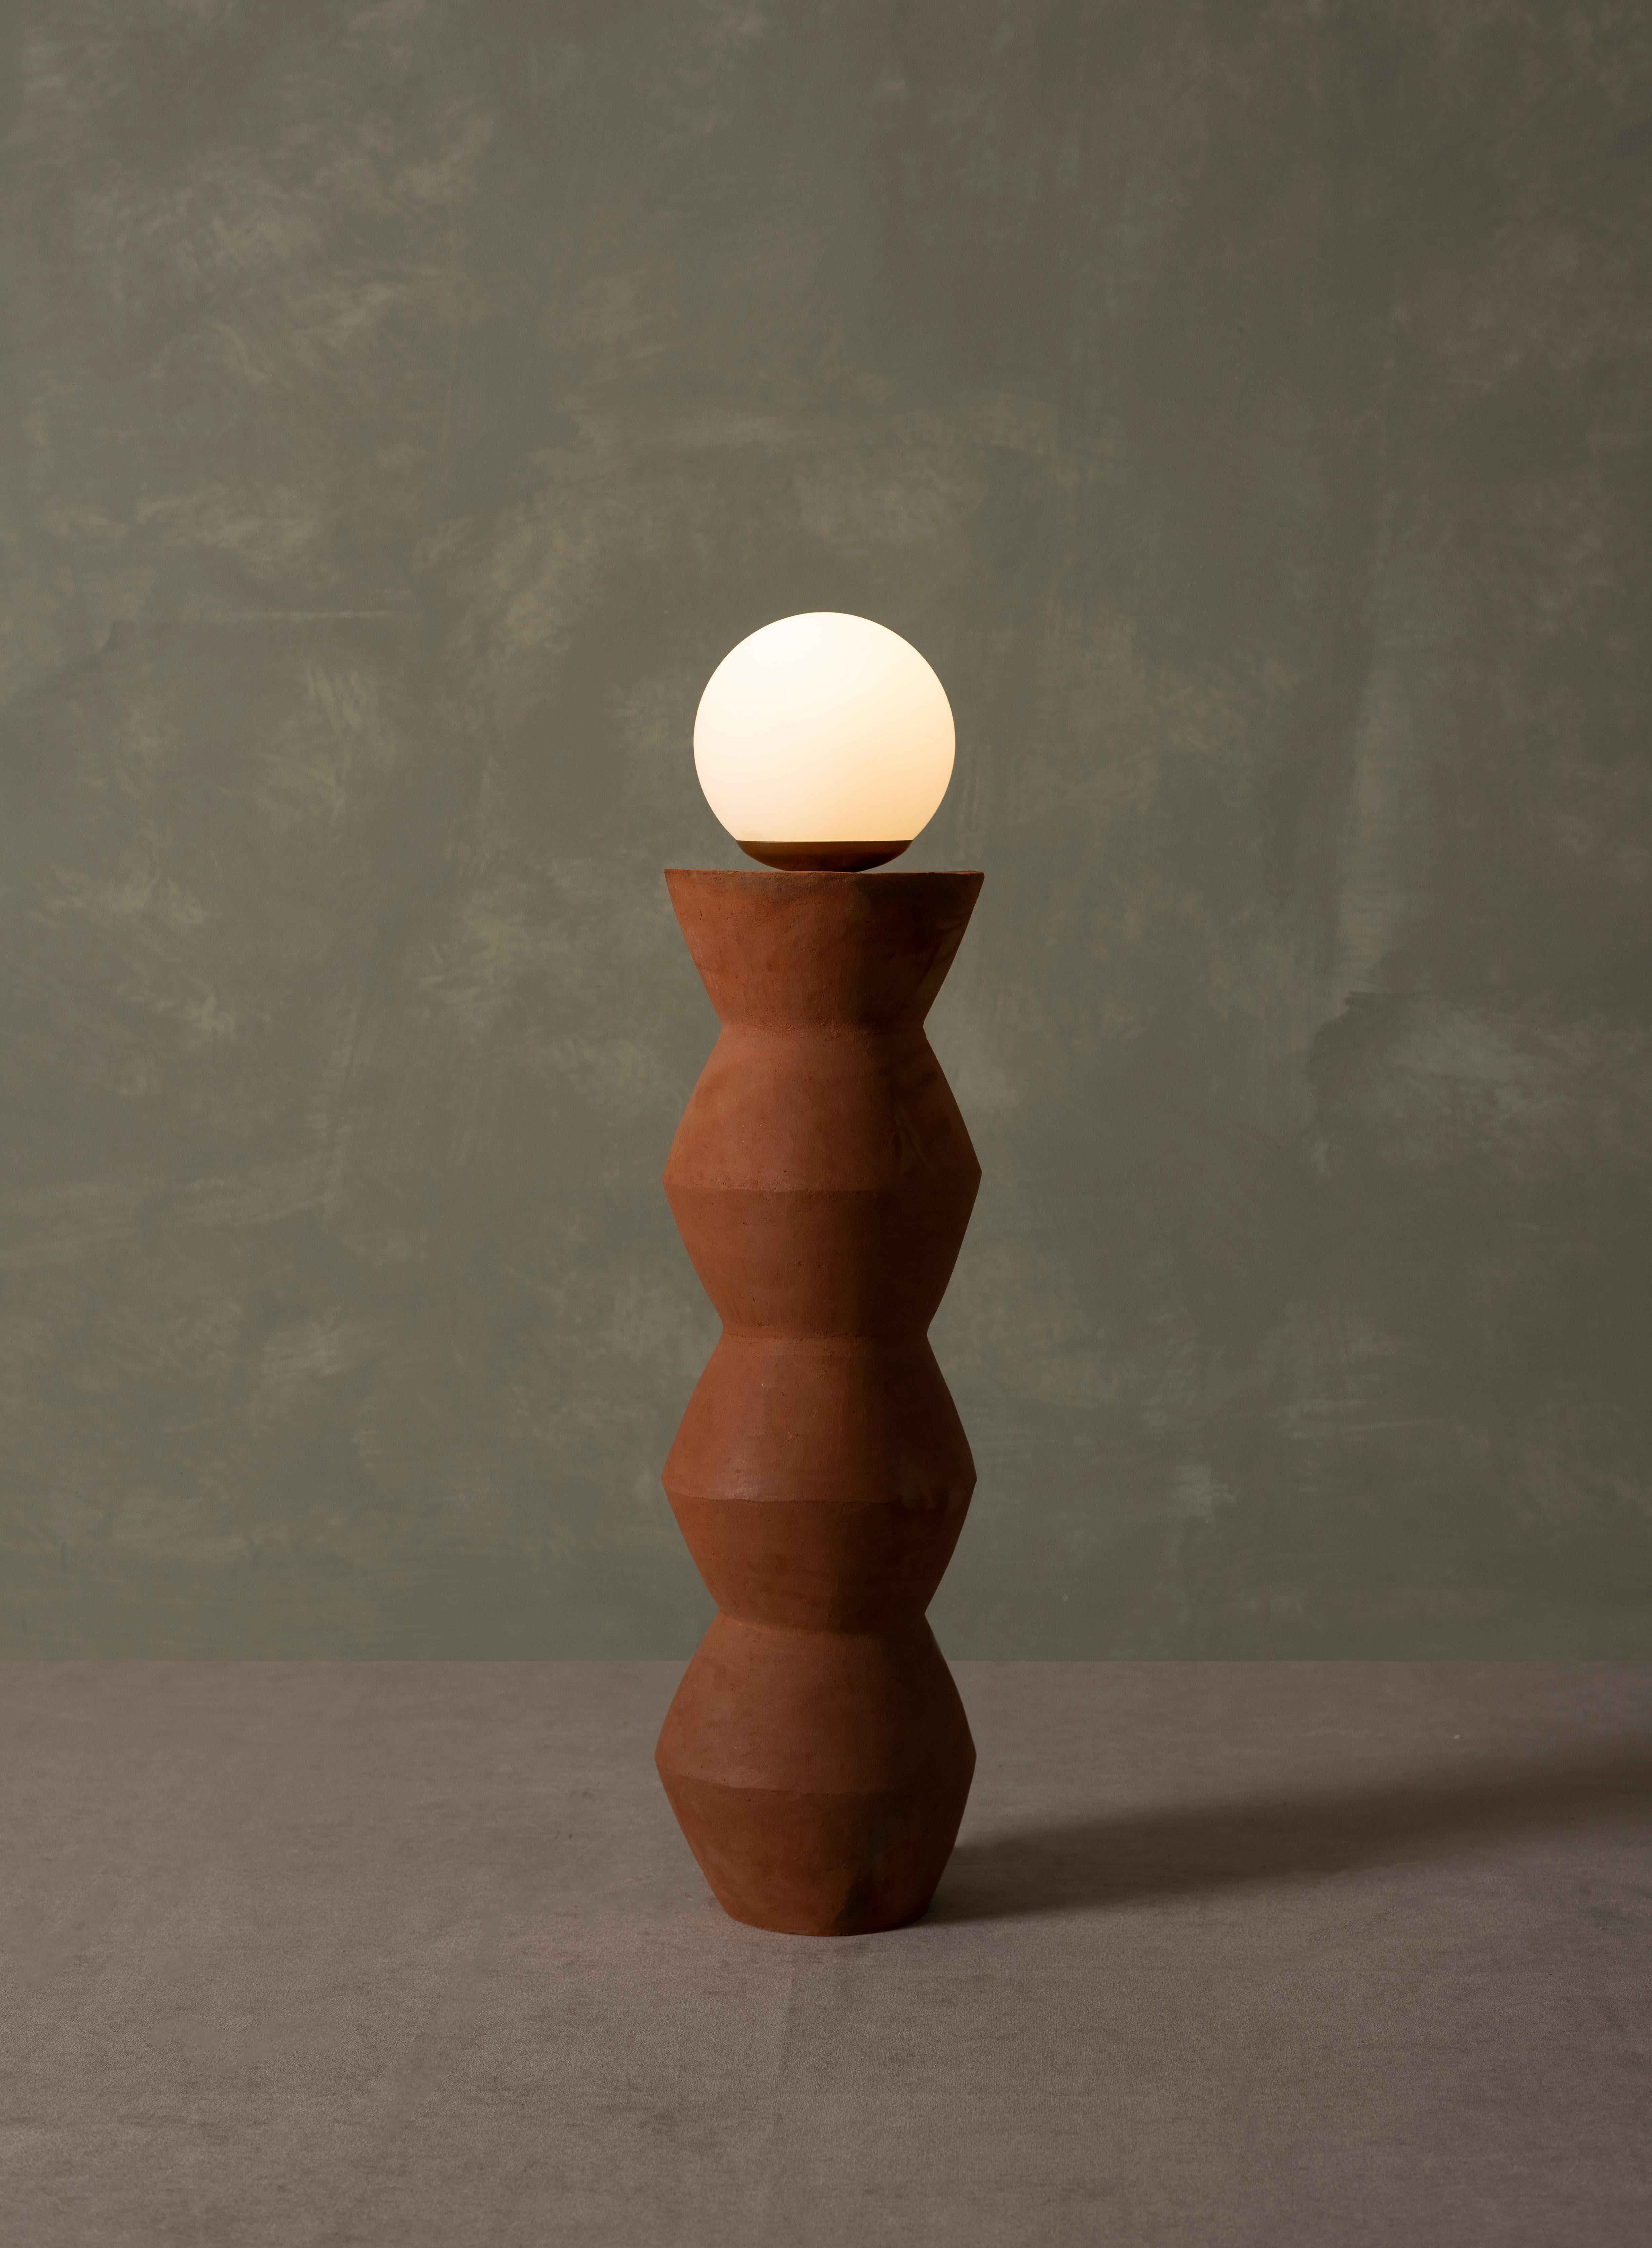 Somos Standing Lamp by Estudio Calido
Dimensions: D 19 x W 19 x H 80 cm.
Materials: Terracota Clay, Glass. 
Weight: 7 kg. 

In regards to our Production Process: since it is a handmade process, dimensions may vary. With the Terracotta lamps it